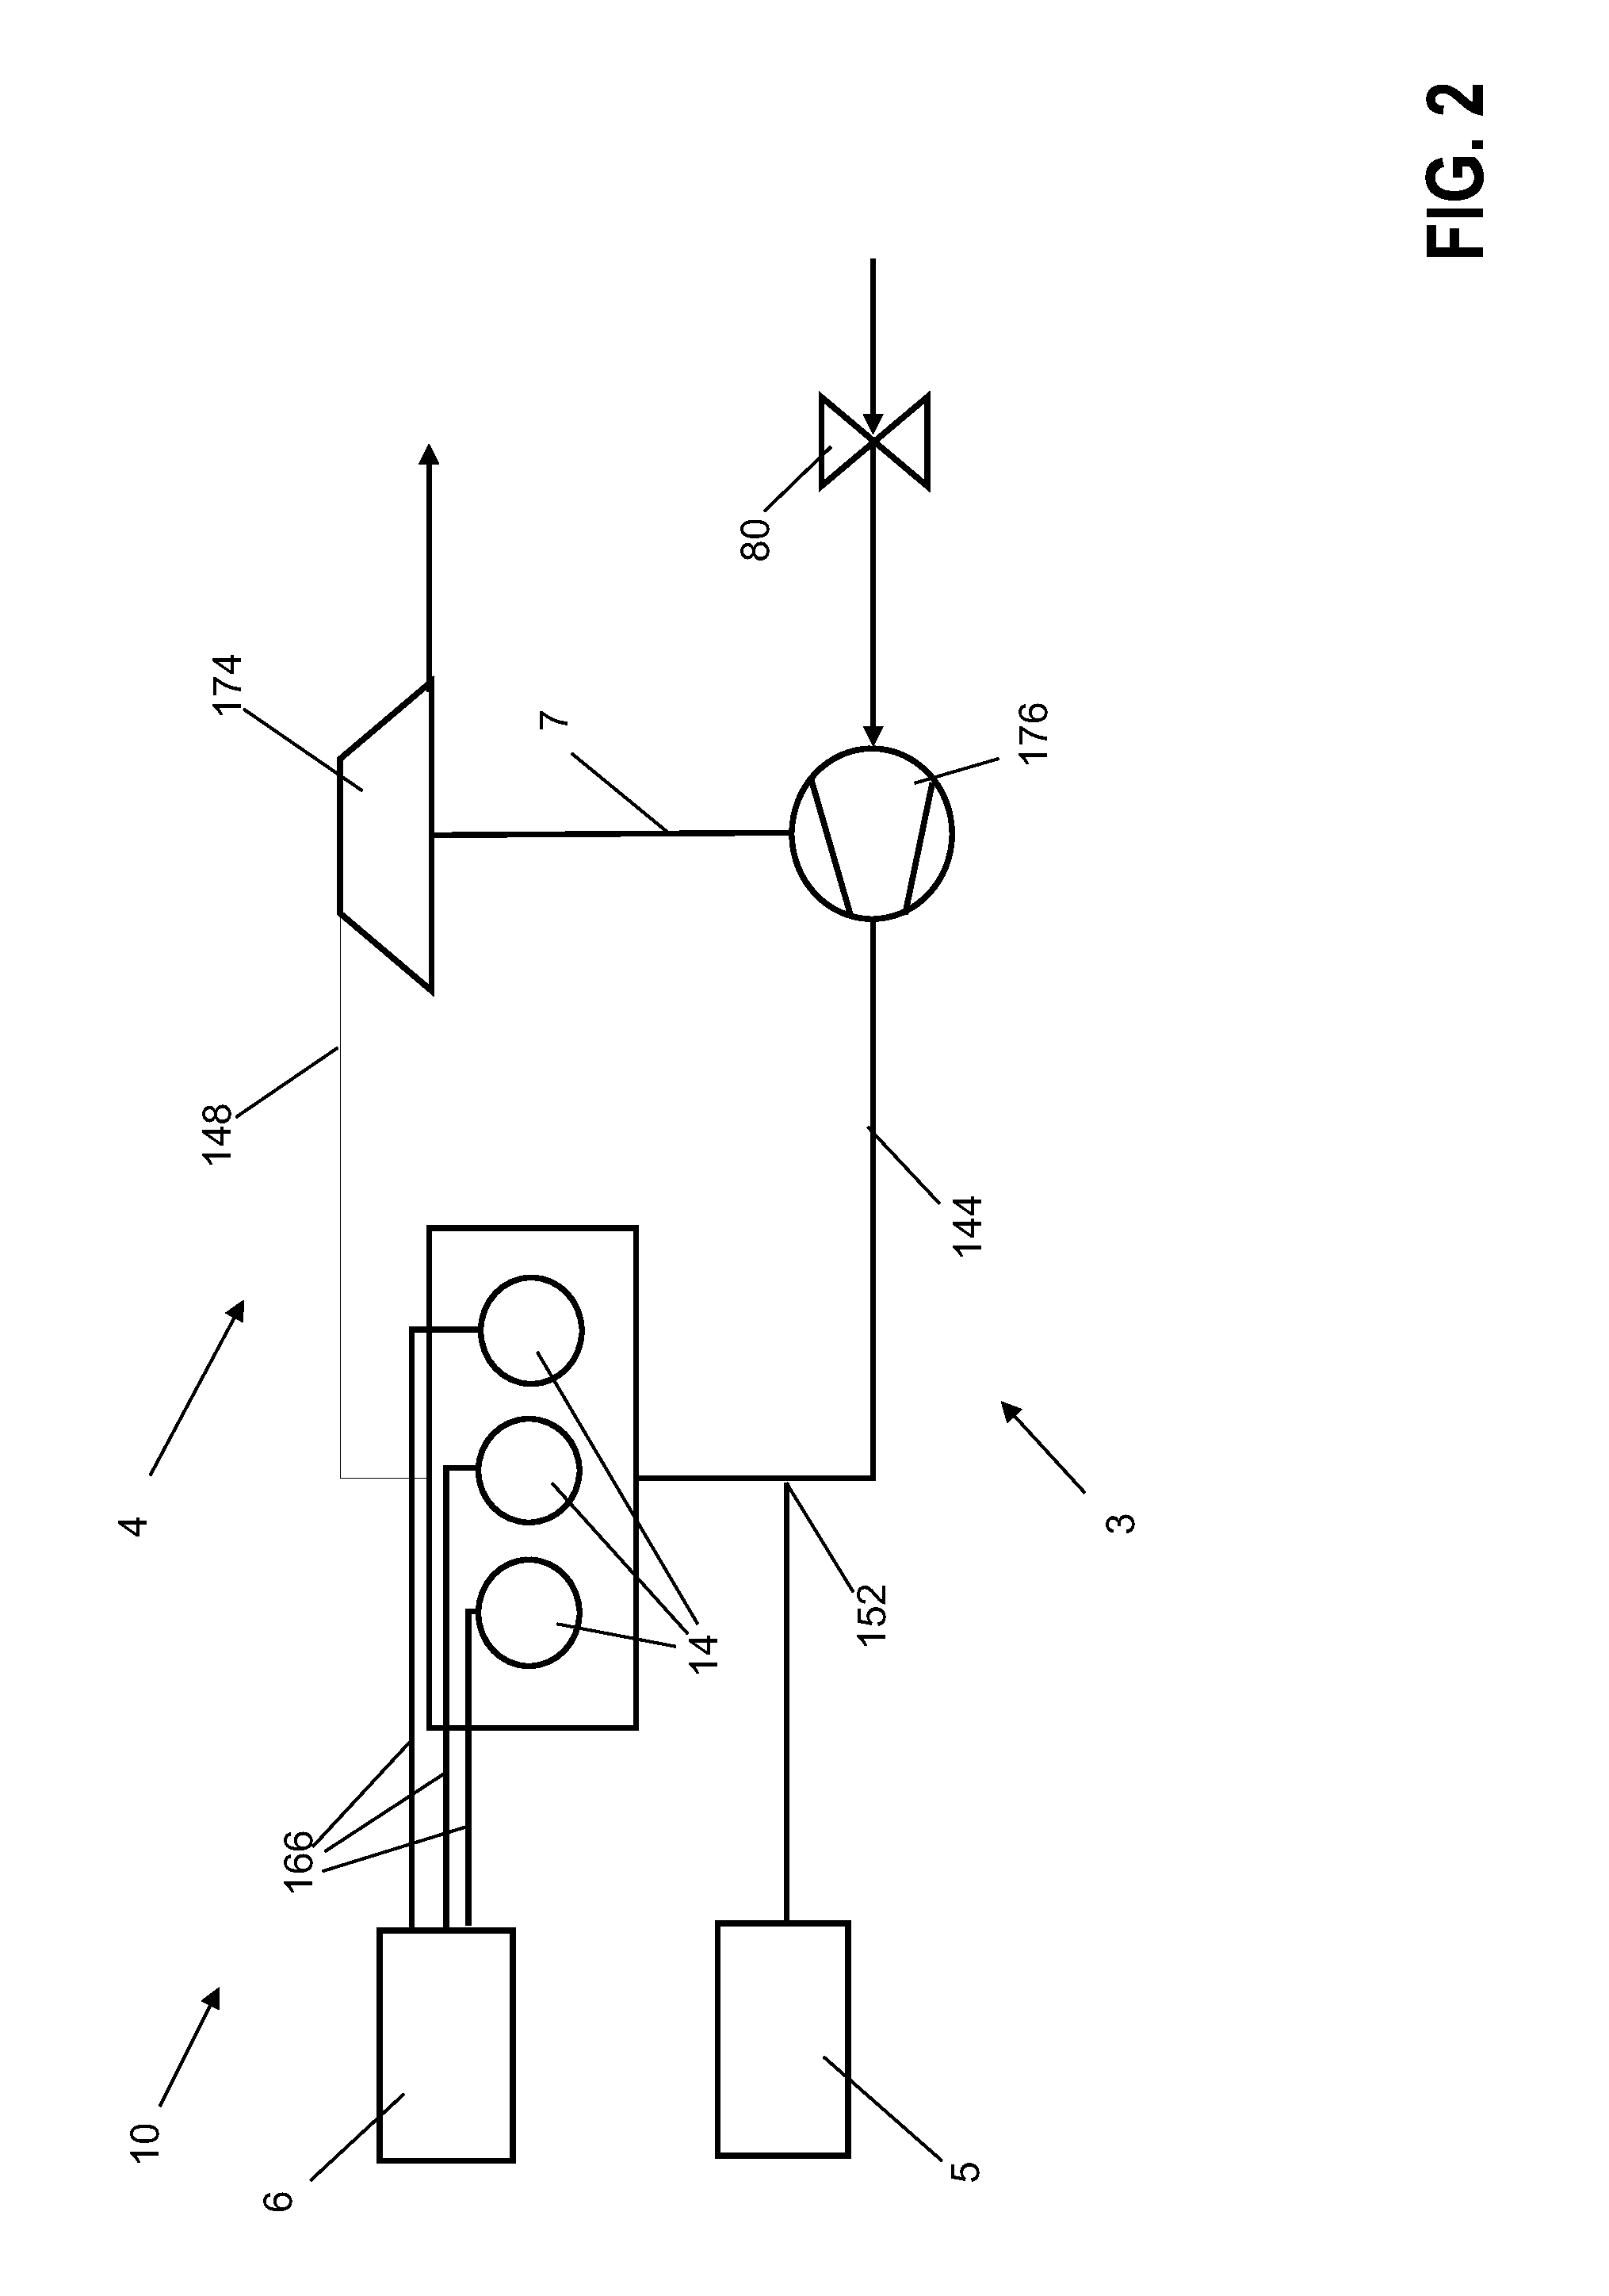 Internal combustion engine which can be operated with liquid and with gaseous fuel and a method for operating an internal combustion engine of this kind